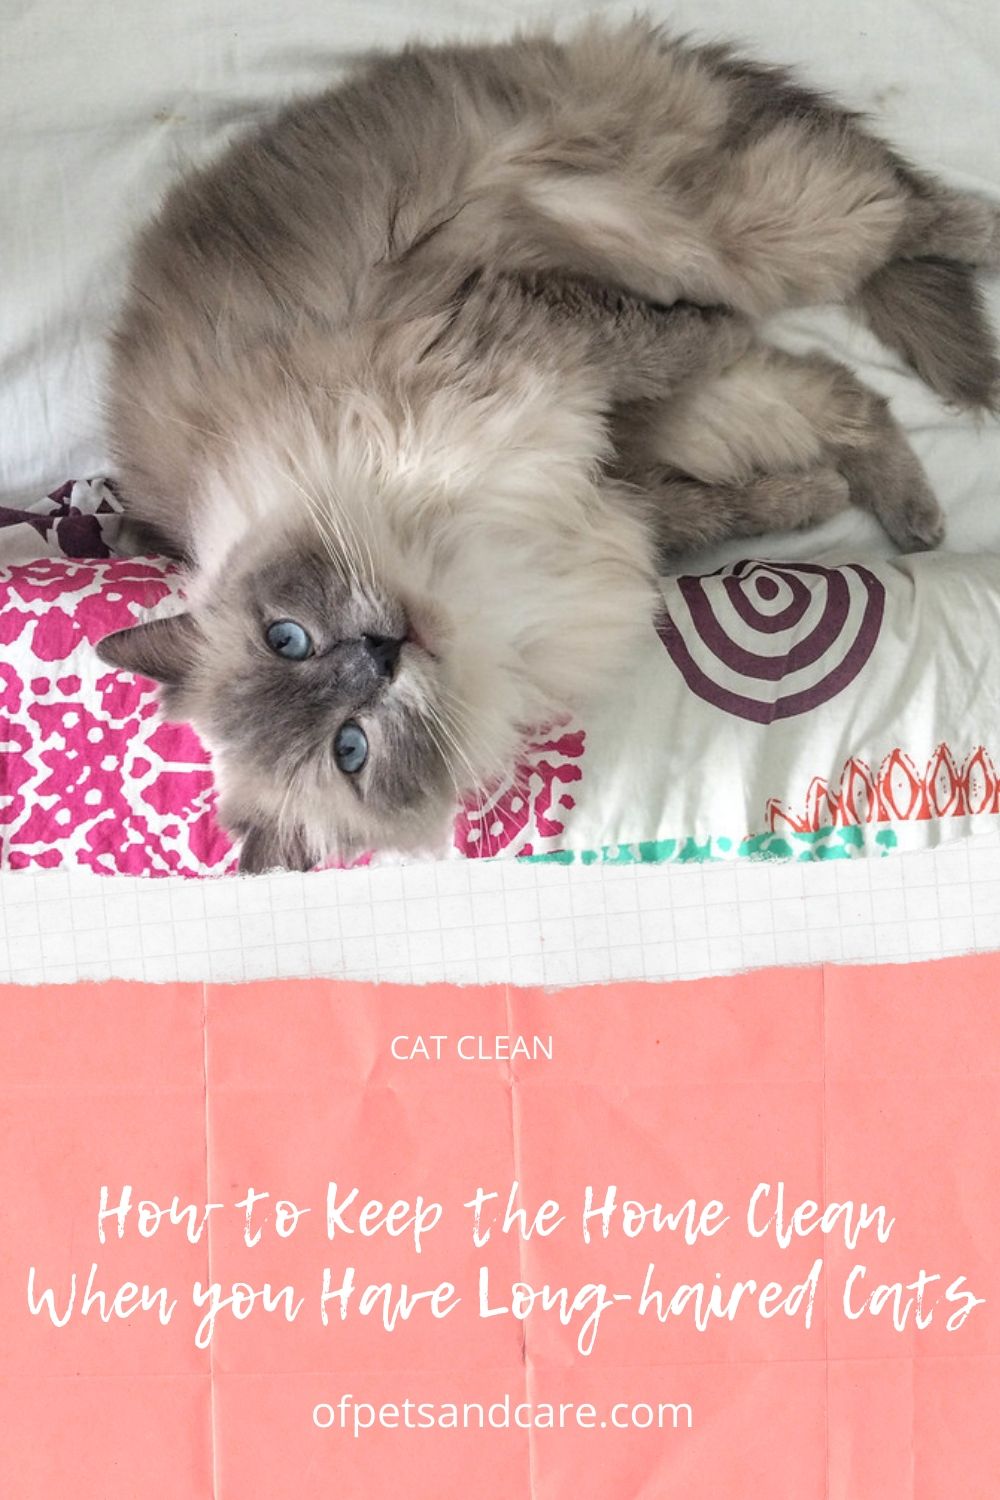 Having cats at home is relaxing and fun...but, it can also be tiresome. That is when you have long-haired cats shedding their fur all day long. As a pet owner and homemaker, one has to see to it that the cats are happy and the home is well-maintained.